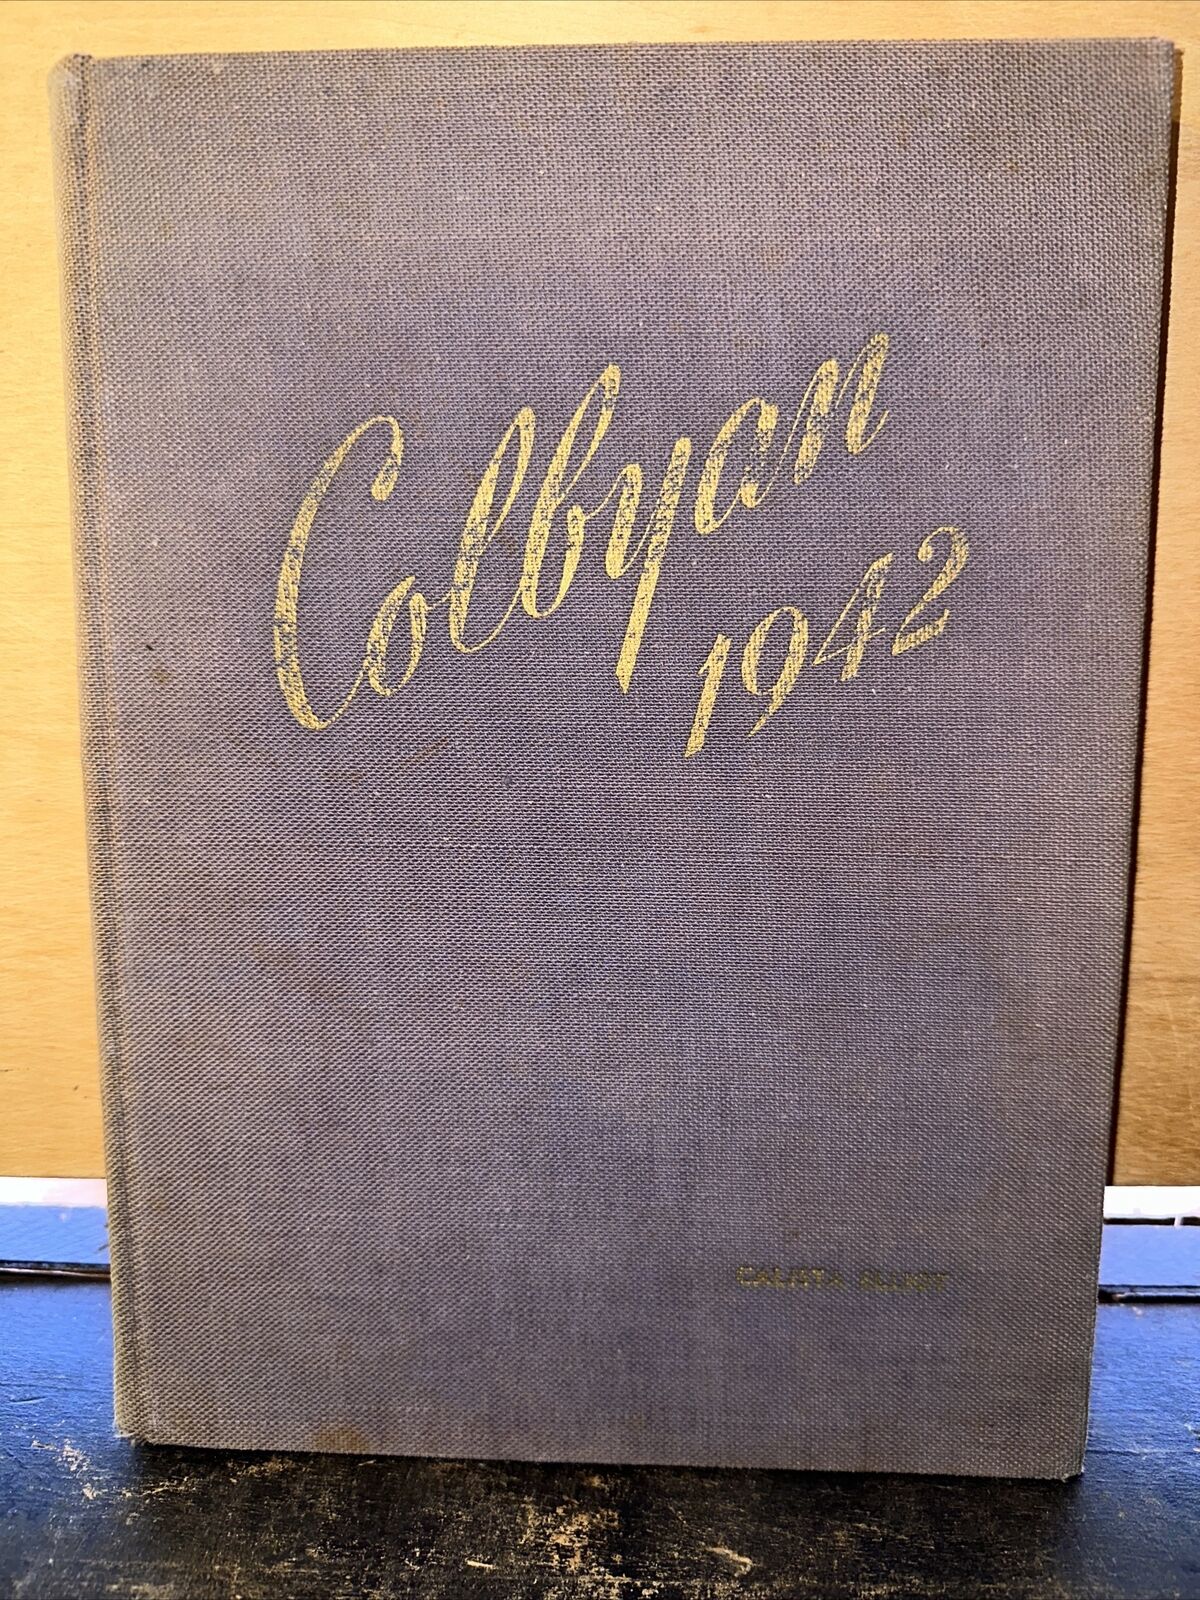 1942 Colby junior college for woman -Year Book- New London New Hampshire